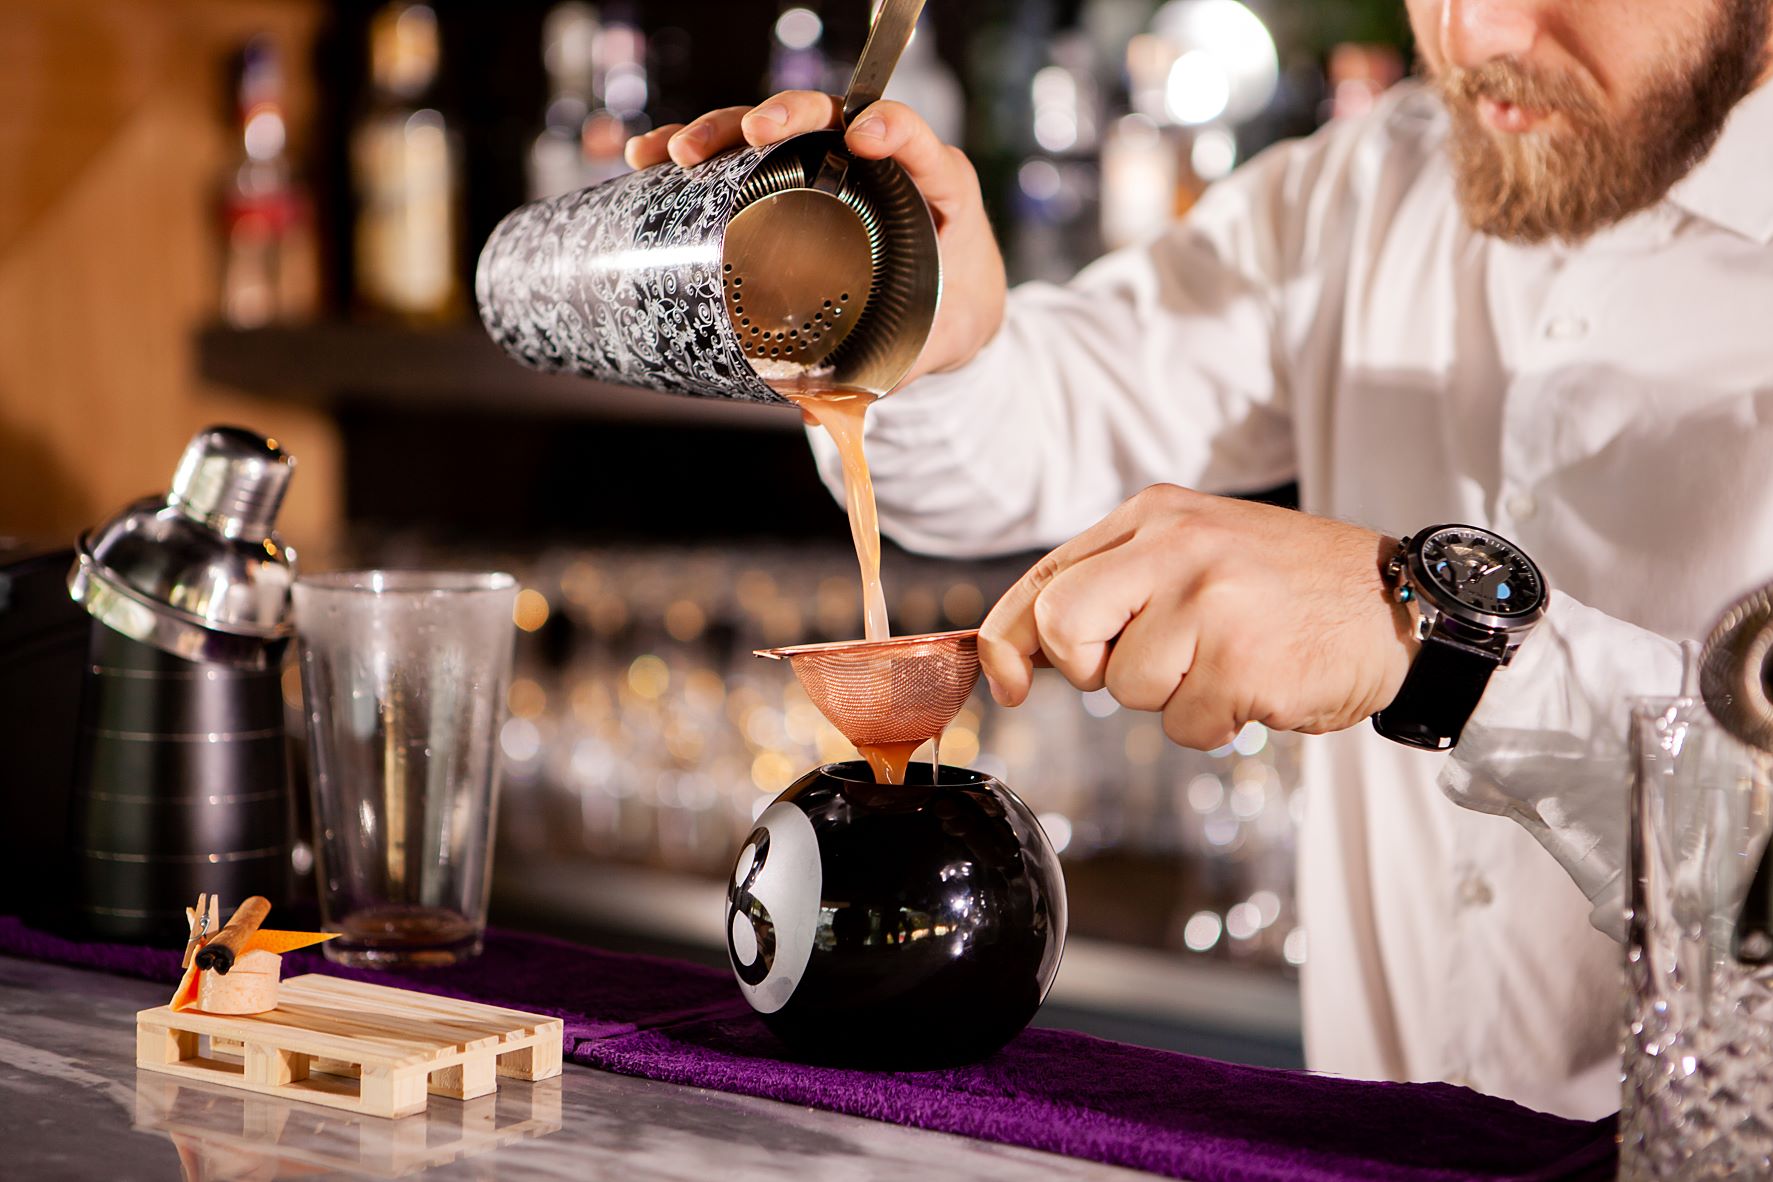 Serve These Drinks At Your Bar on New Year's Eve